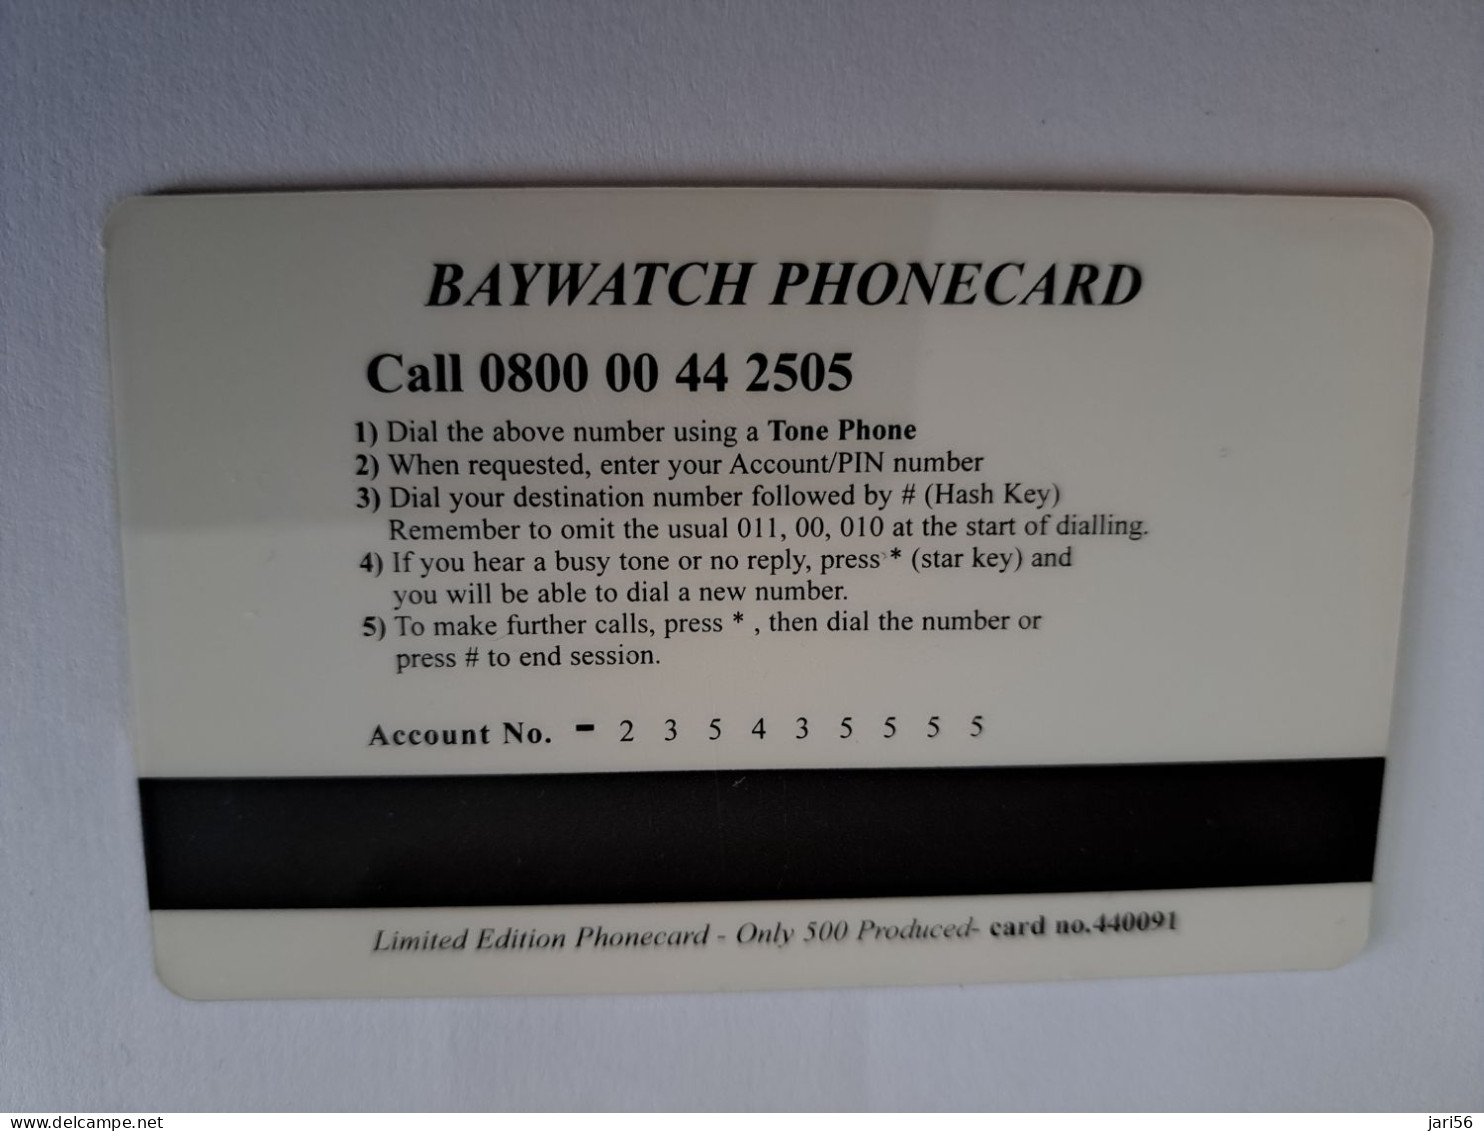 GREAT BRITAIN / 10 POUND /MAGSTRIPE  / BAYWATCH PHONECARD/ LIMITED EDITION/ ONLY 500 EX     **15682** - Collections